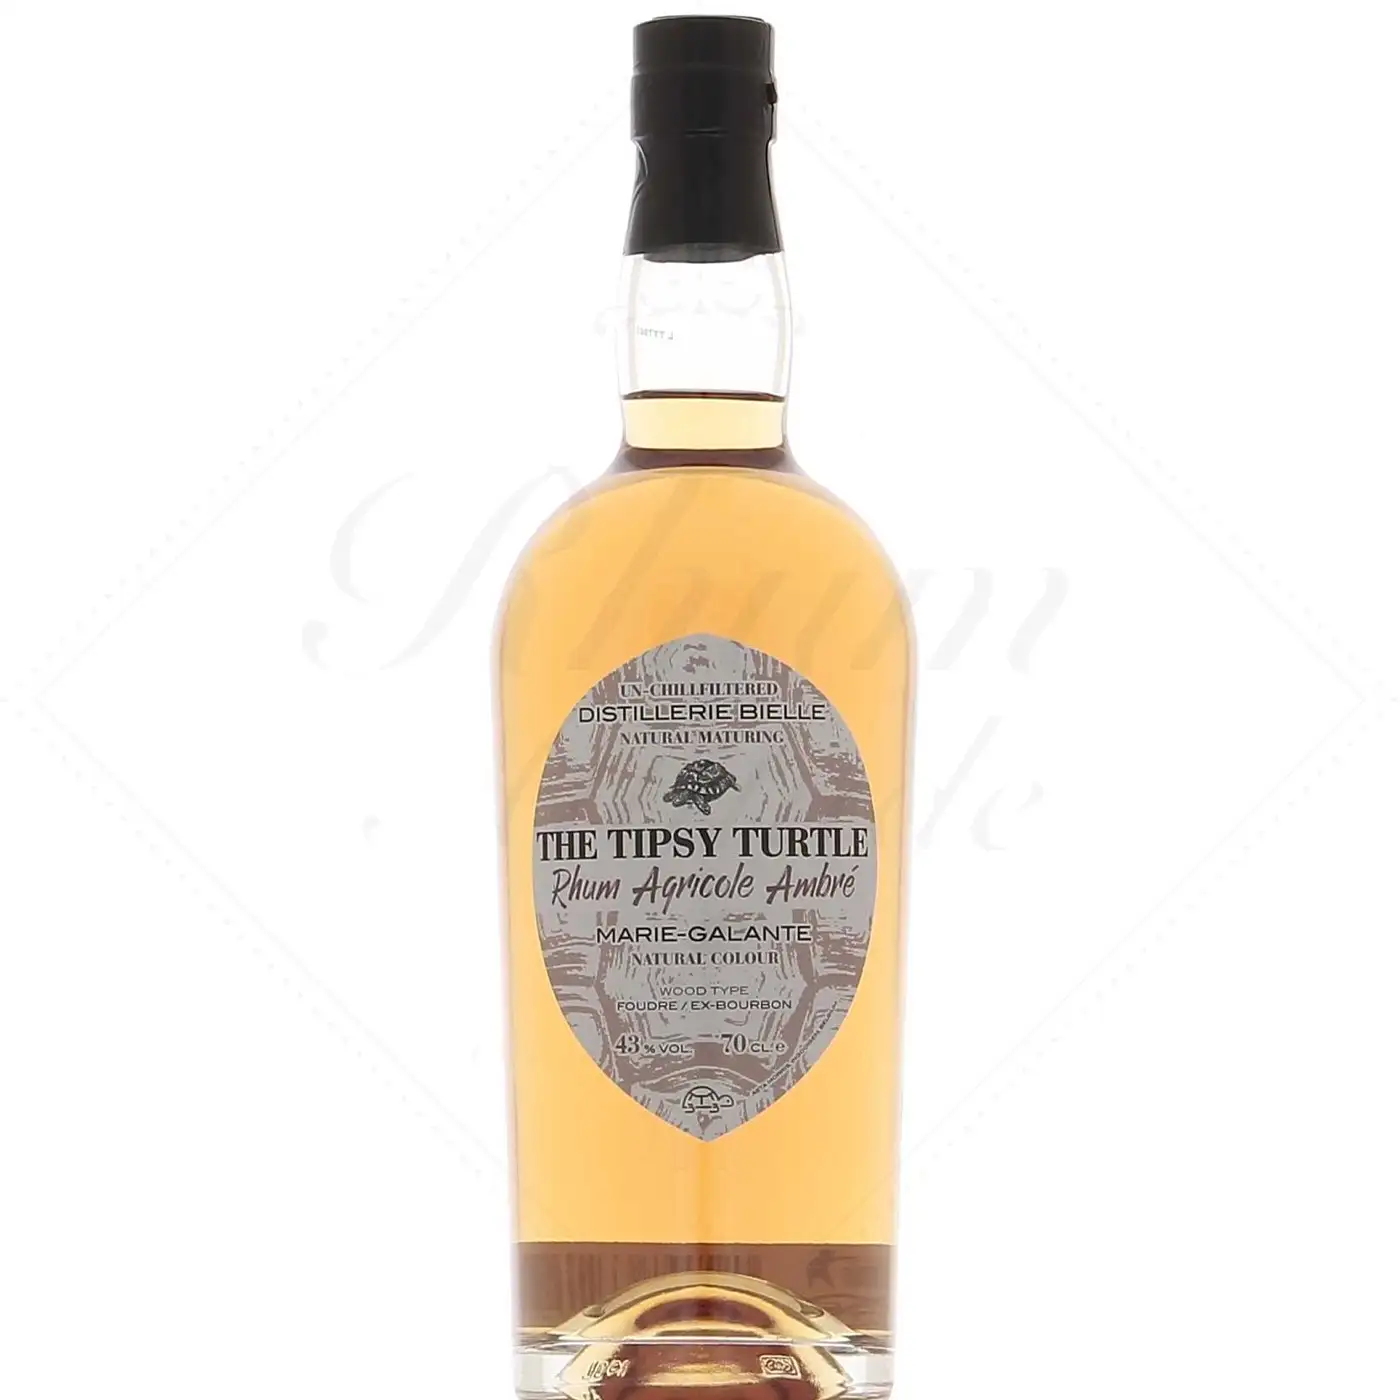 Image of the front of the bottle of the rum The Tipsy Turtle